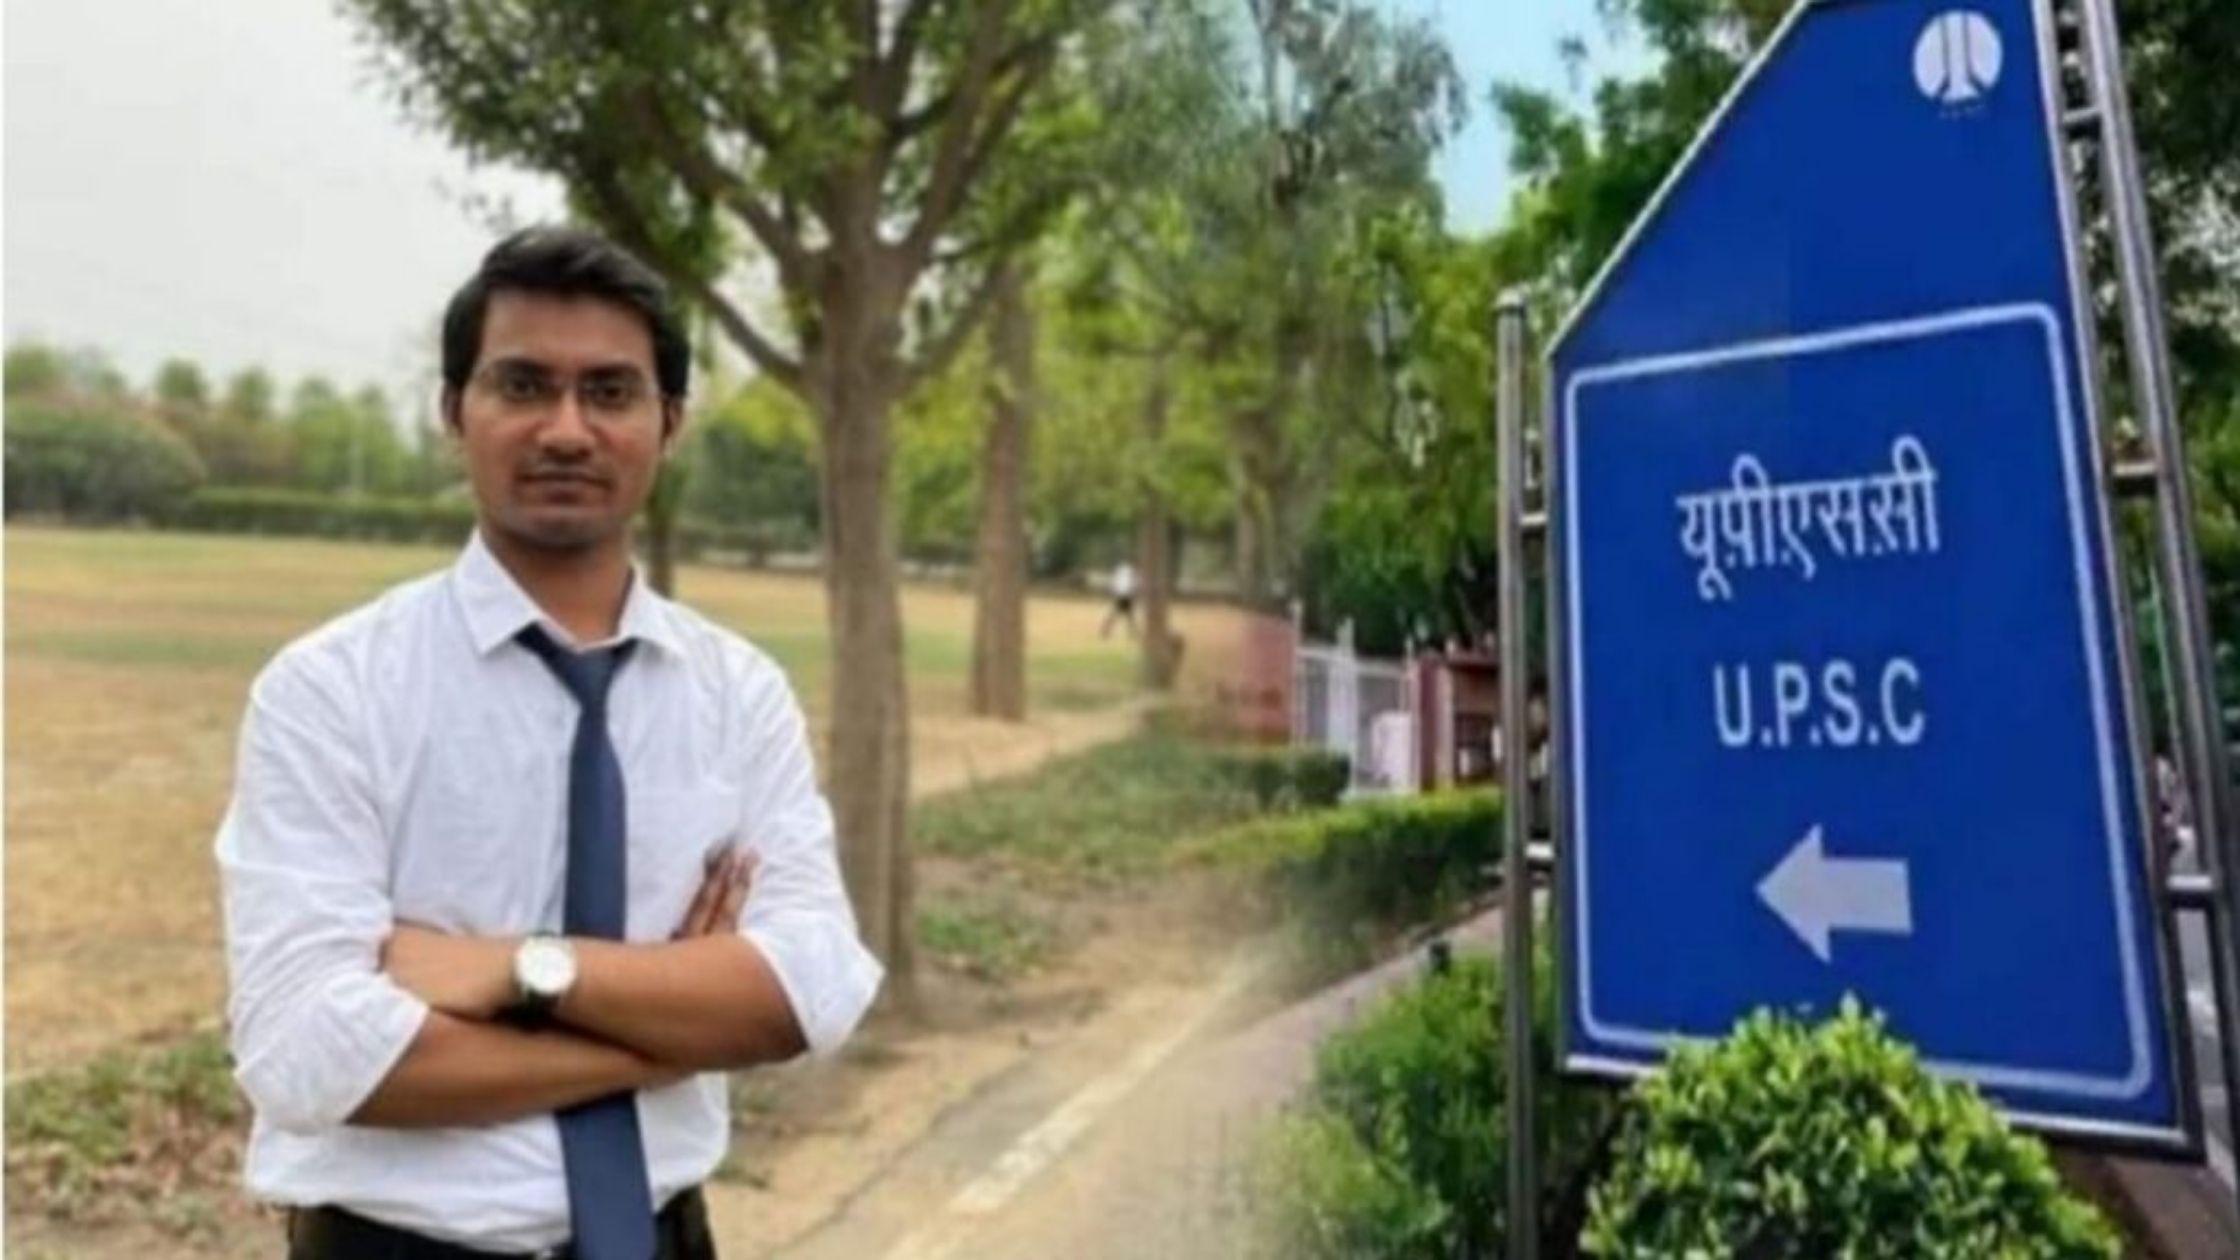 Shubham Kumar from Bihar became All India Topper in UPSC